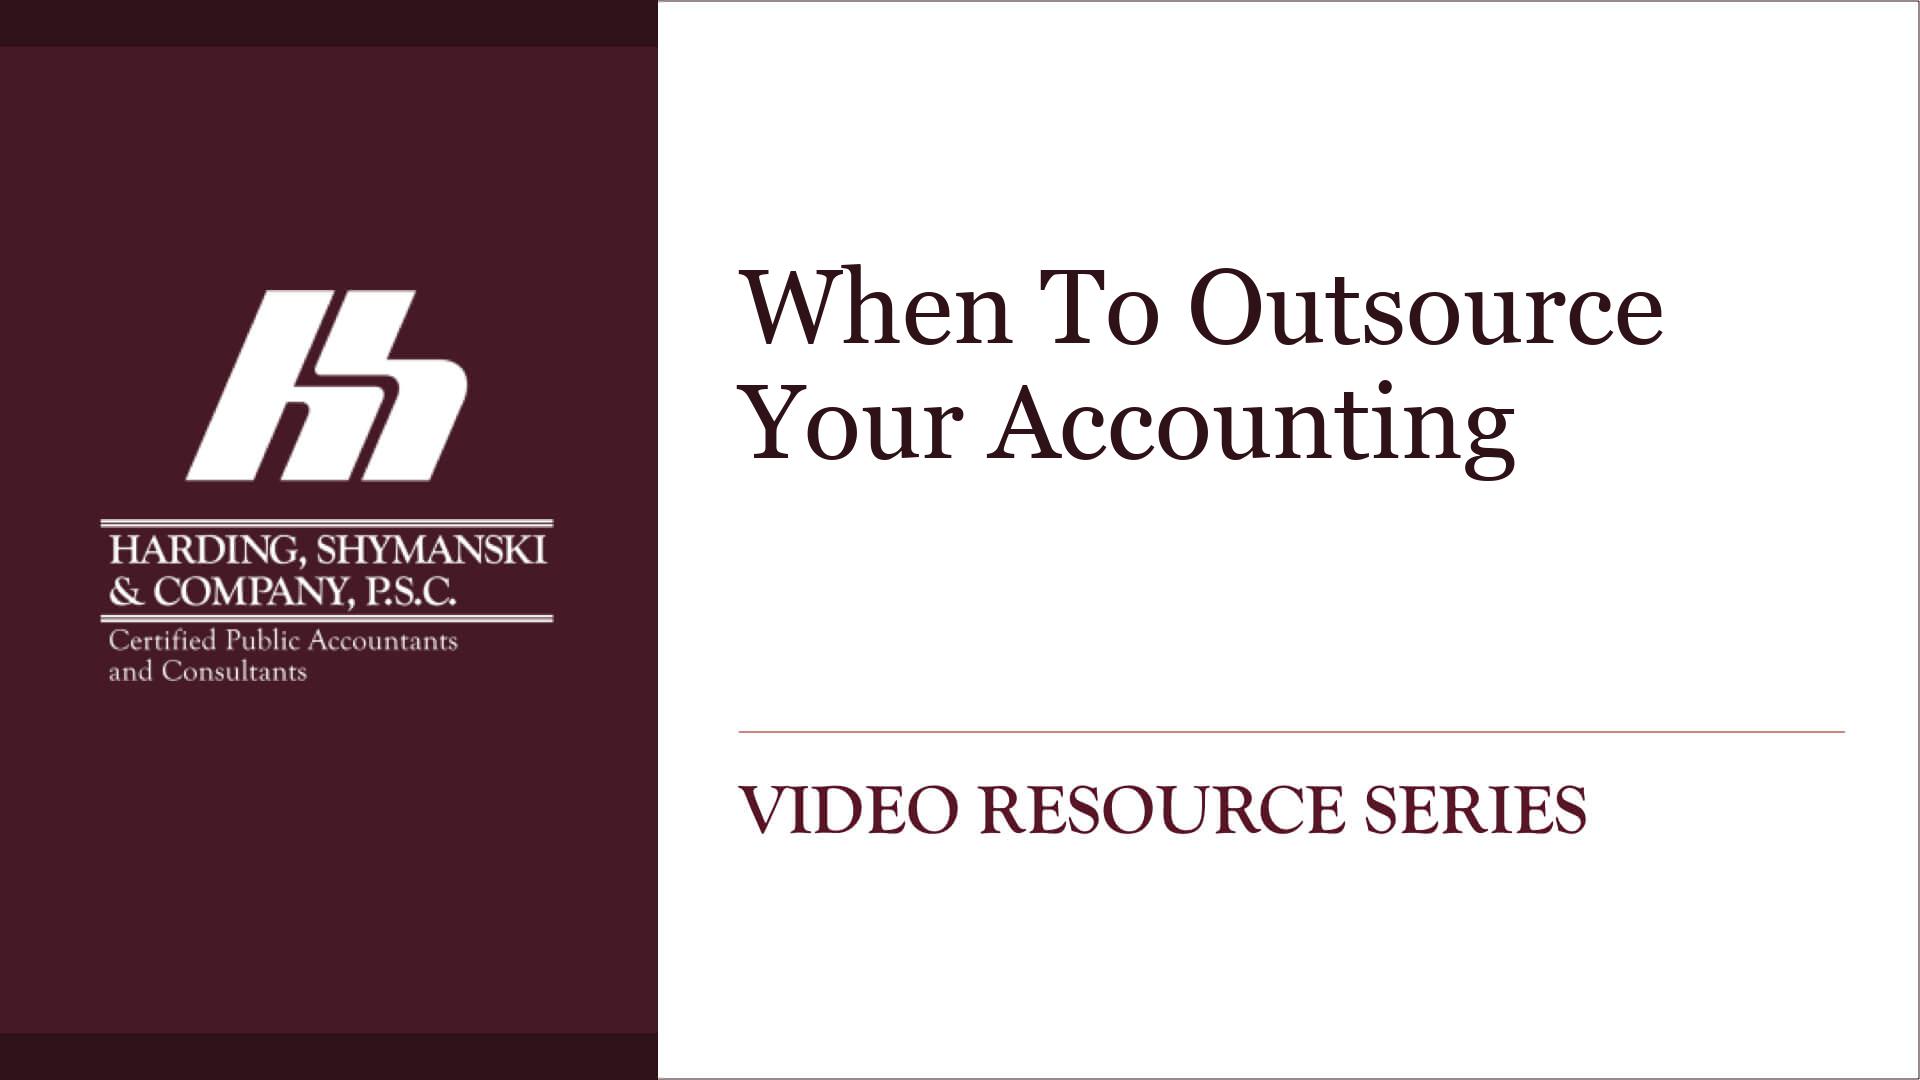 When To Outsource Your Accounting